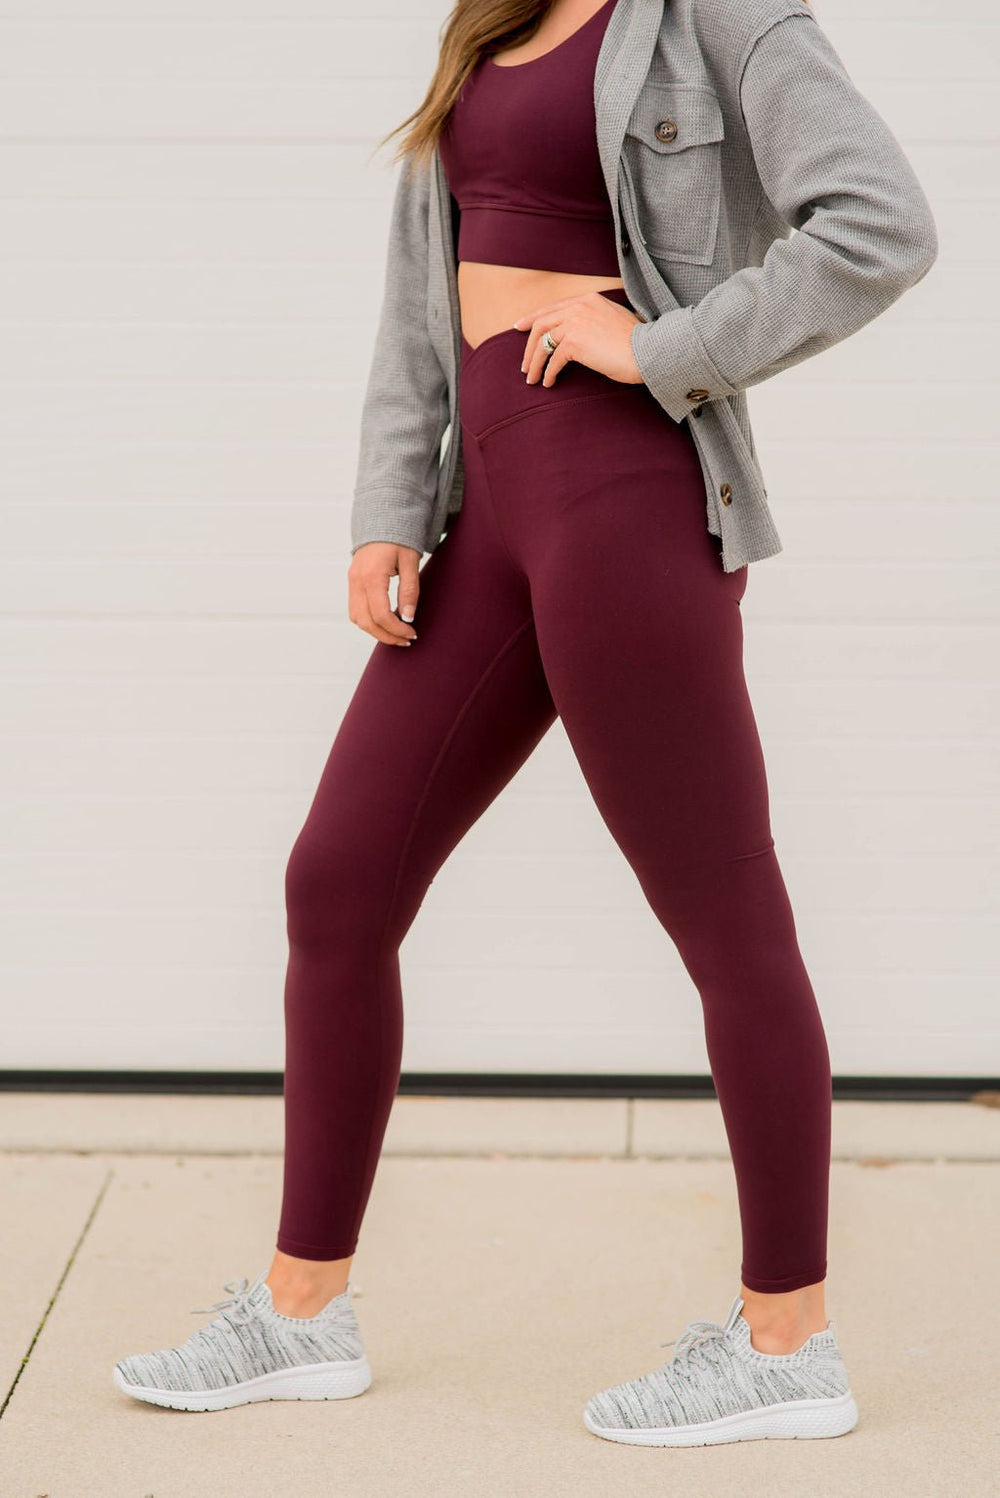 Share more than 148 maroon leggings outfit ideas latest